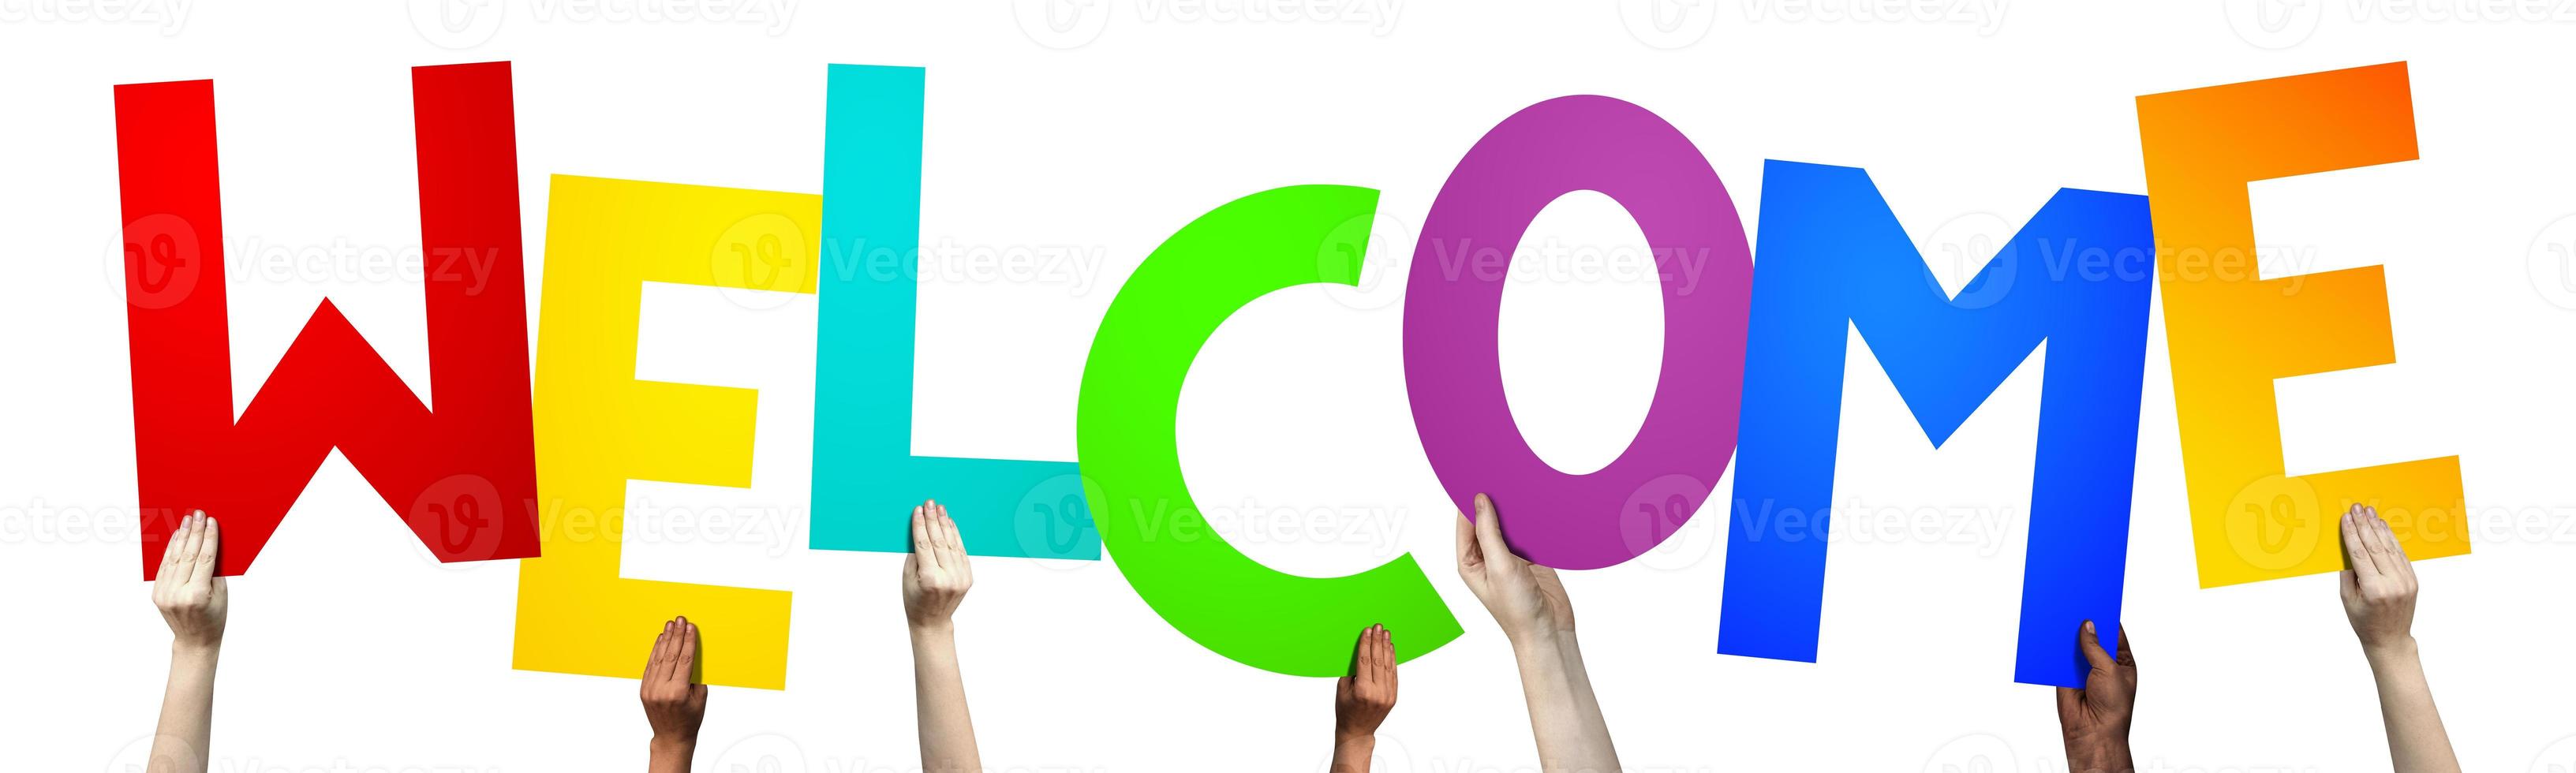 Welcome - Human Hands Holding Colorful Letters photo